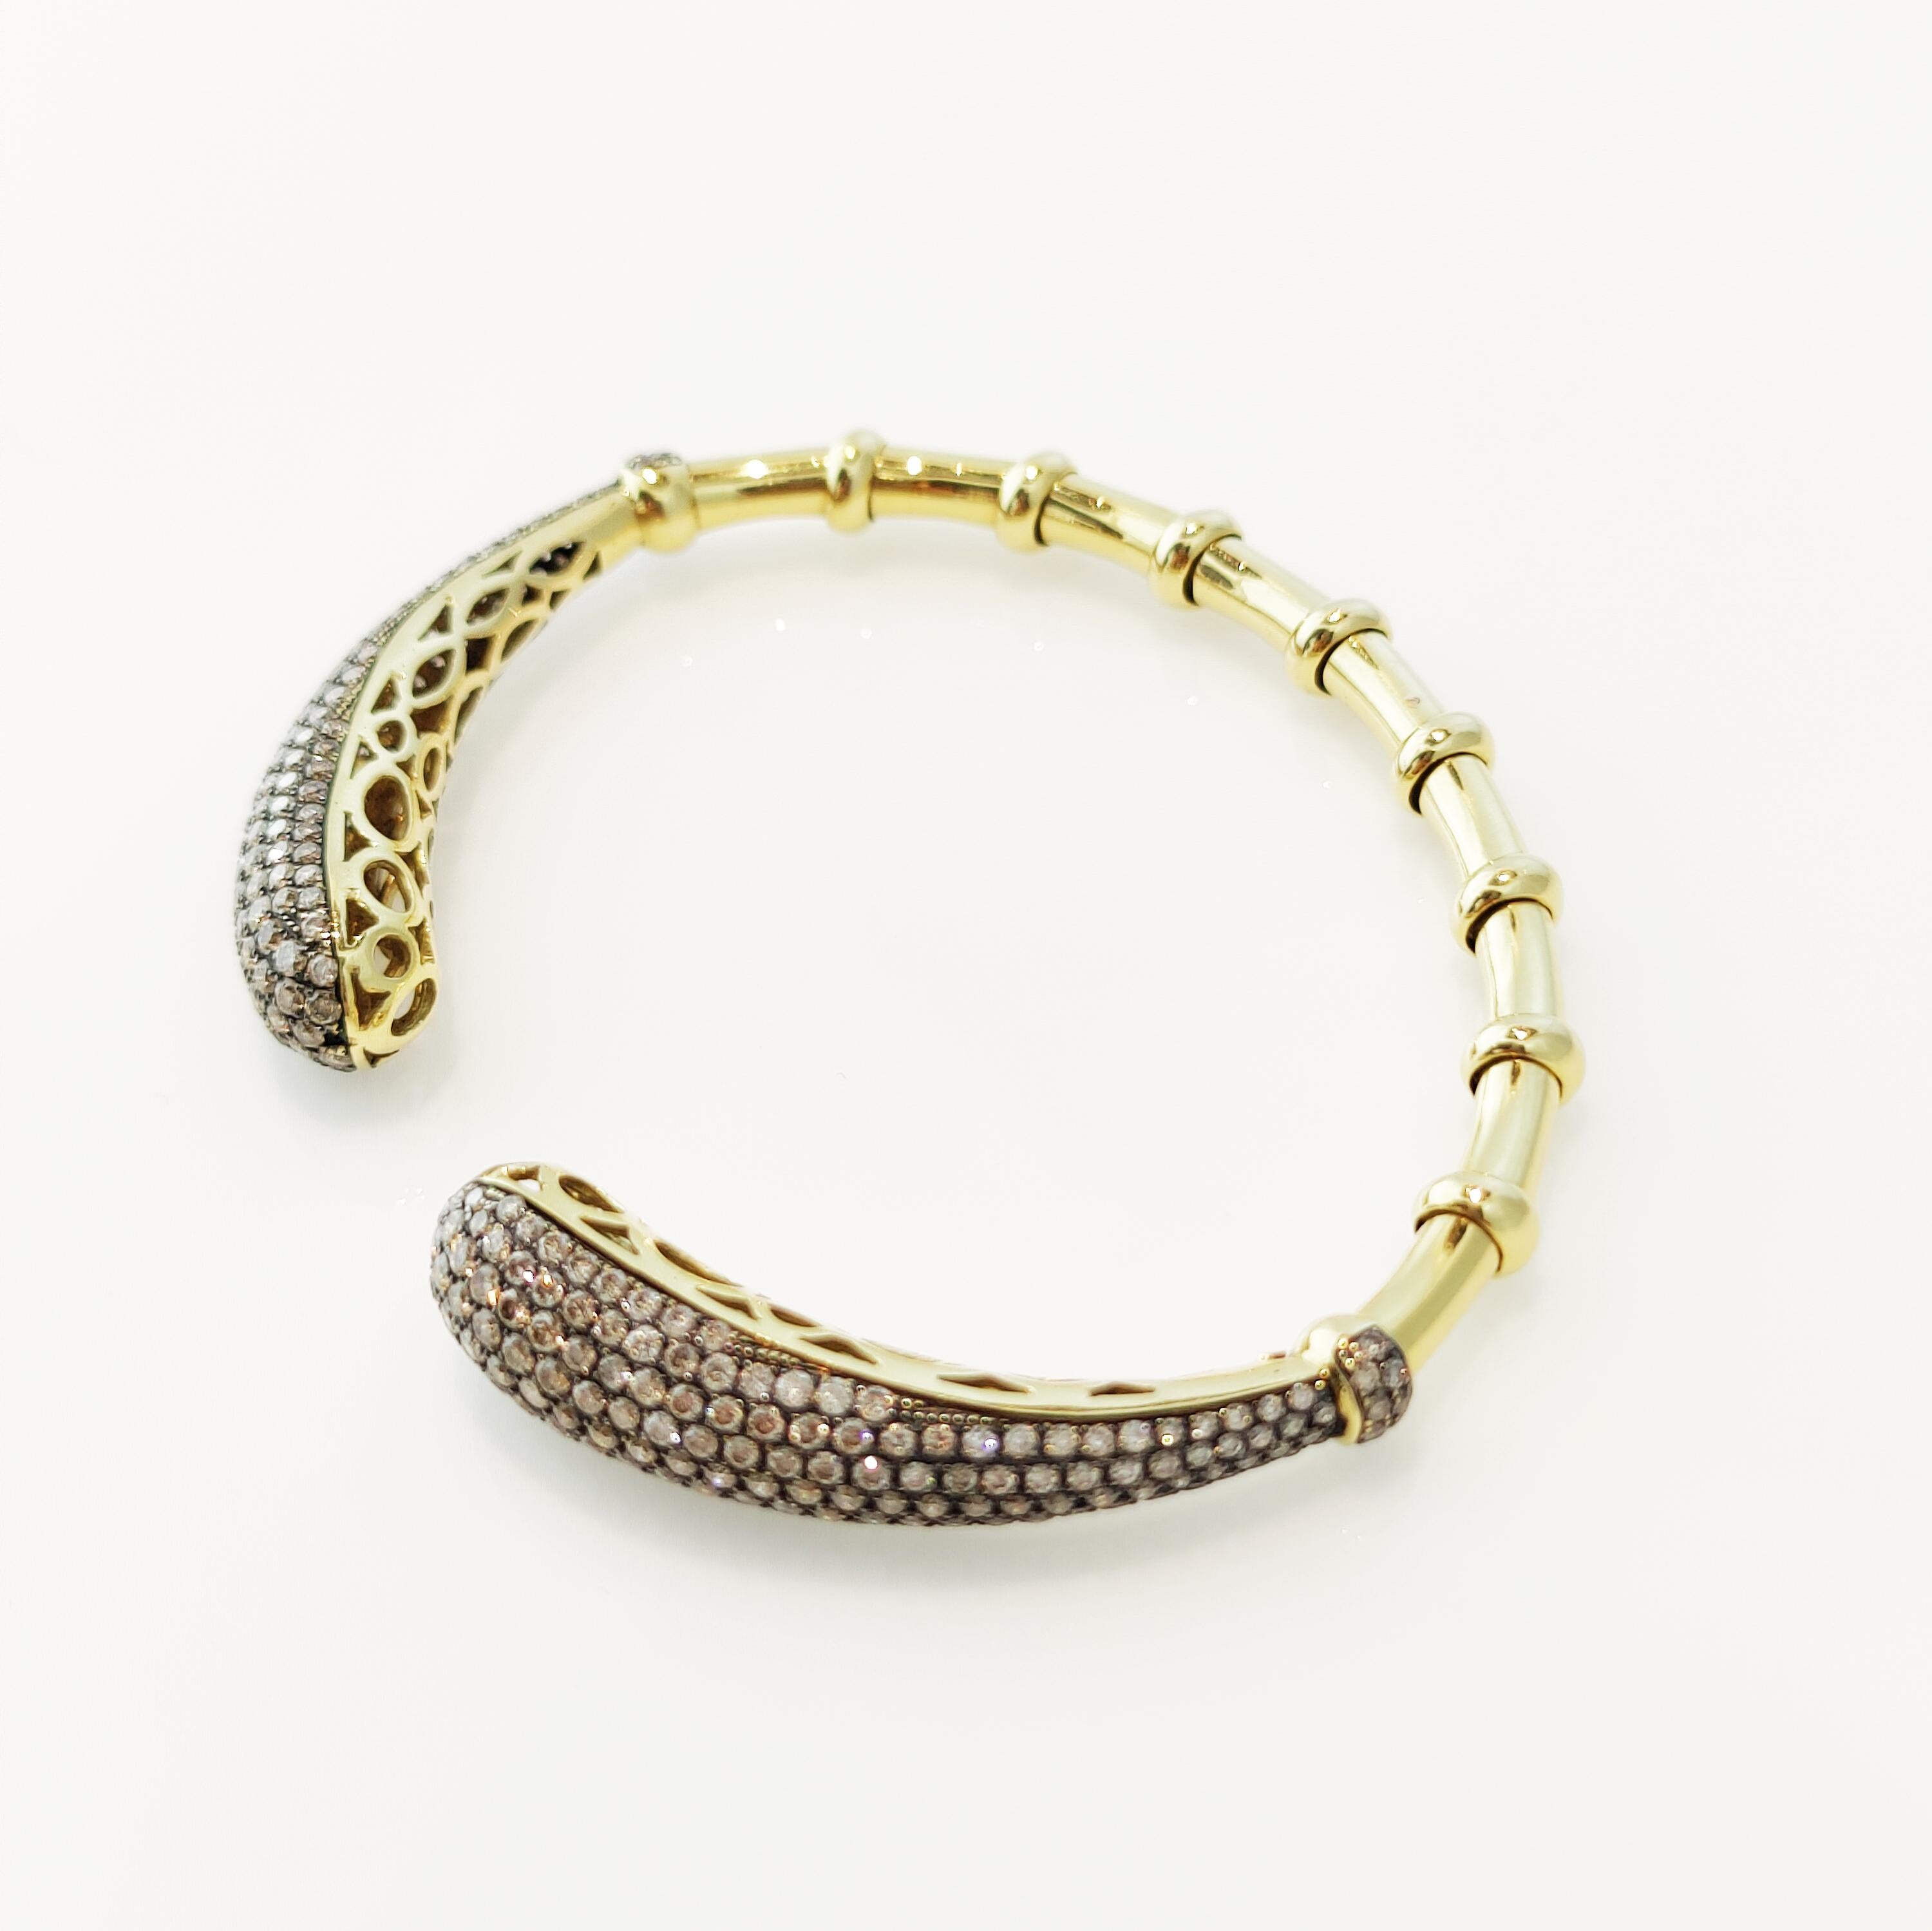 This attractive brown diamond bamboo bangle in 18kt yellow gold convinces especially women who prefer sporty elegance and wearable jewelry for all occasions.

A total of 5.3 carat diamonds are natural brown diamonds of a fine color. The black